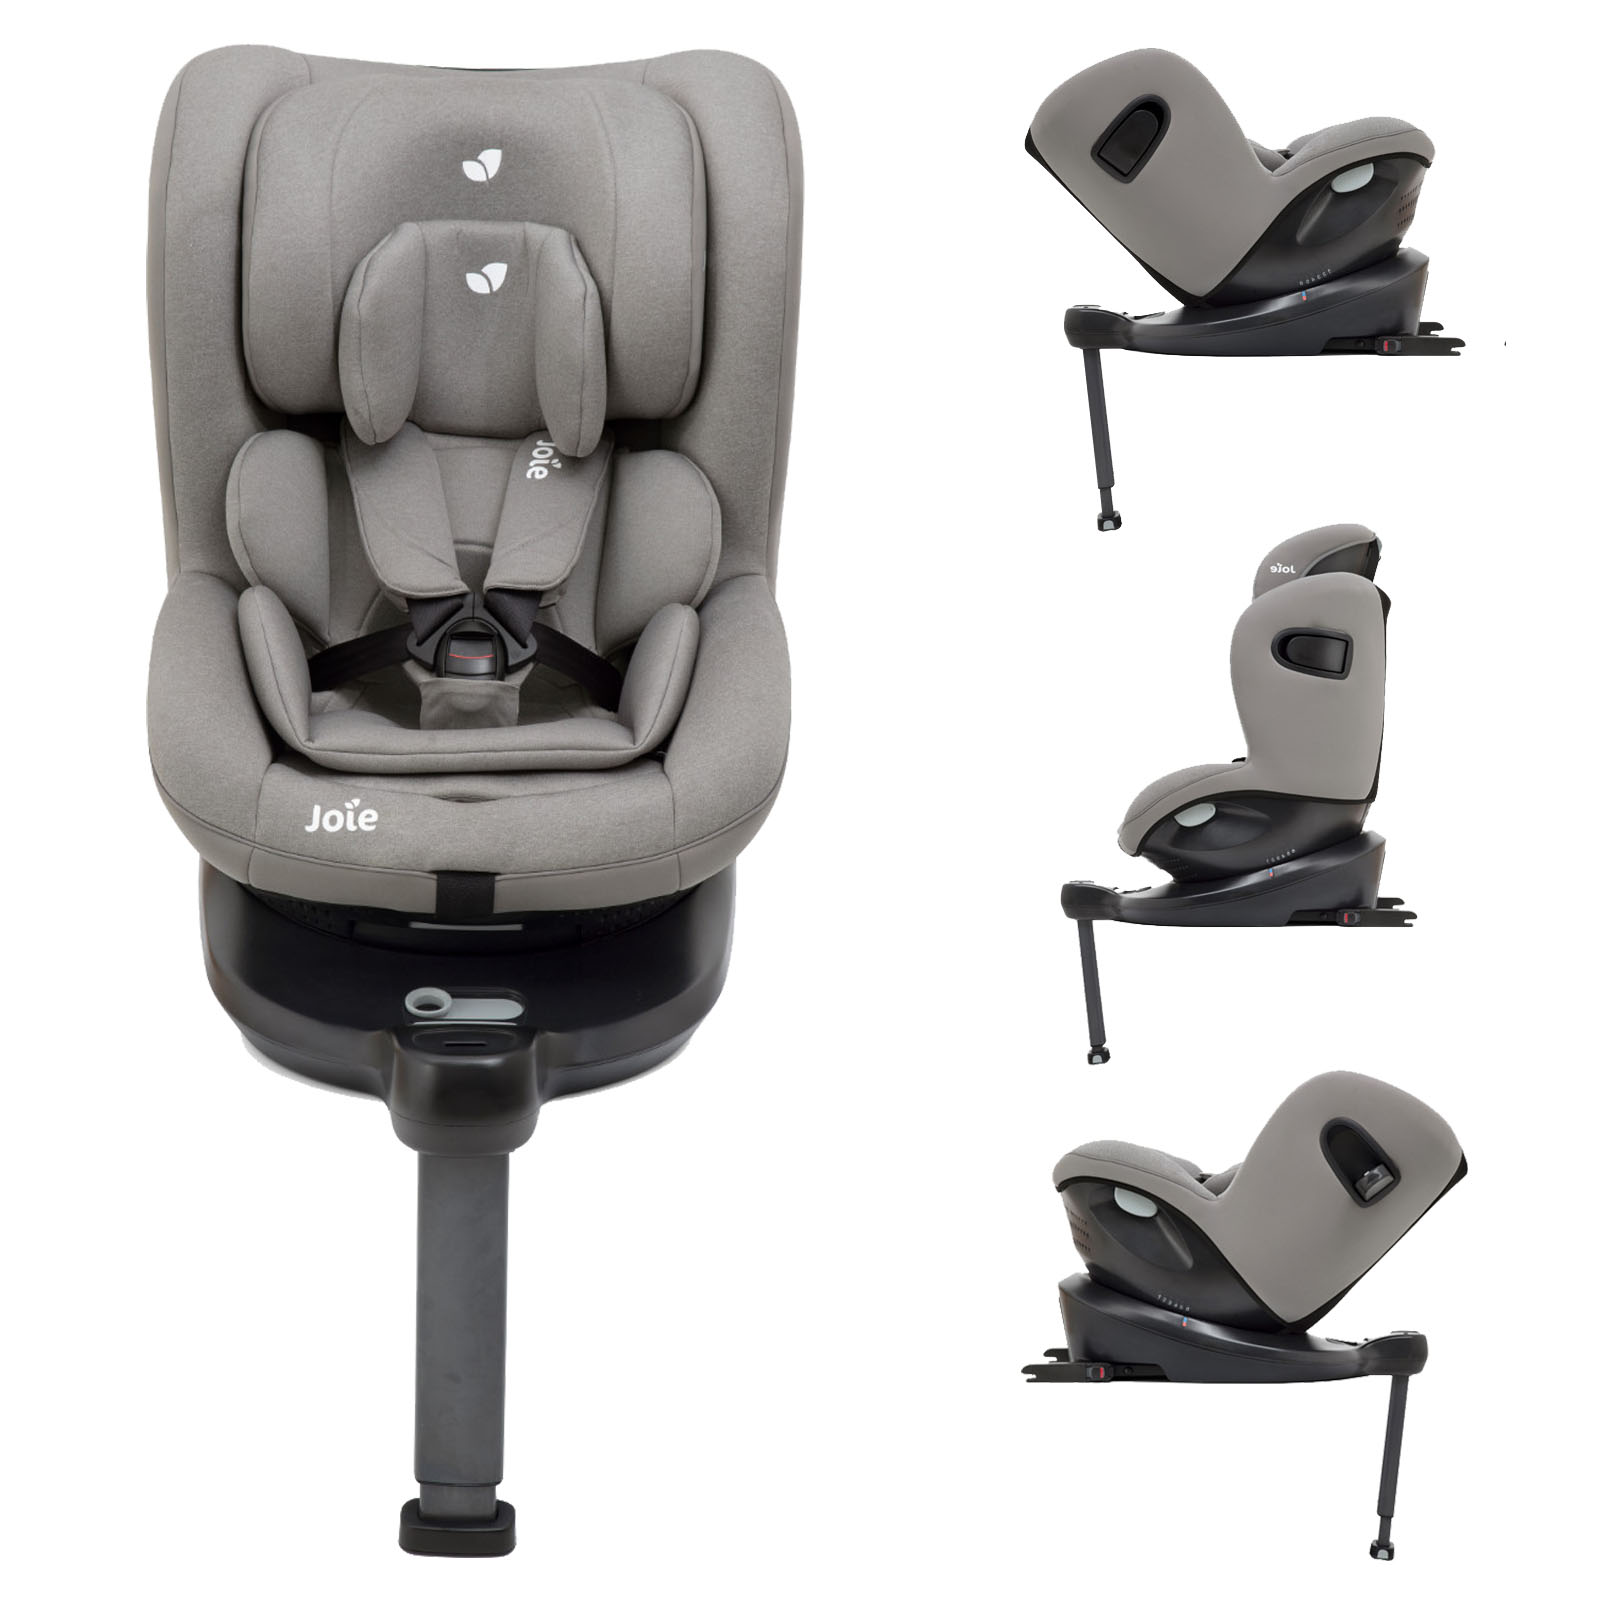 Joie i-Spin 360 iSize ISOFIX Group 0+/1 Car Seat - Grey Flannel